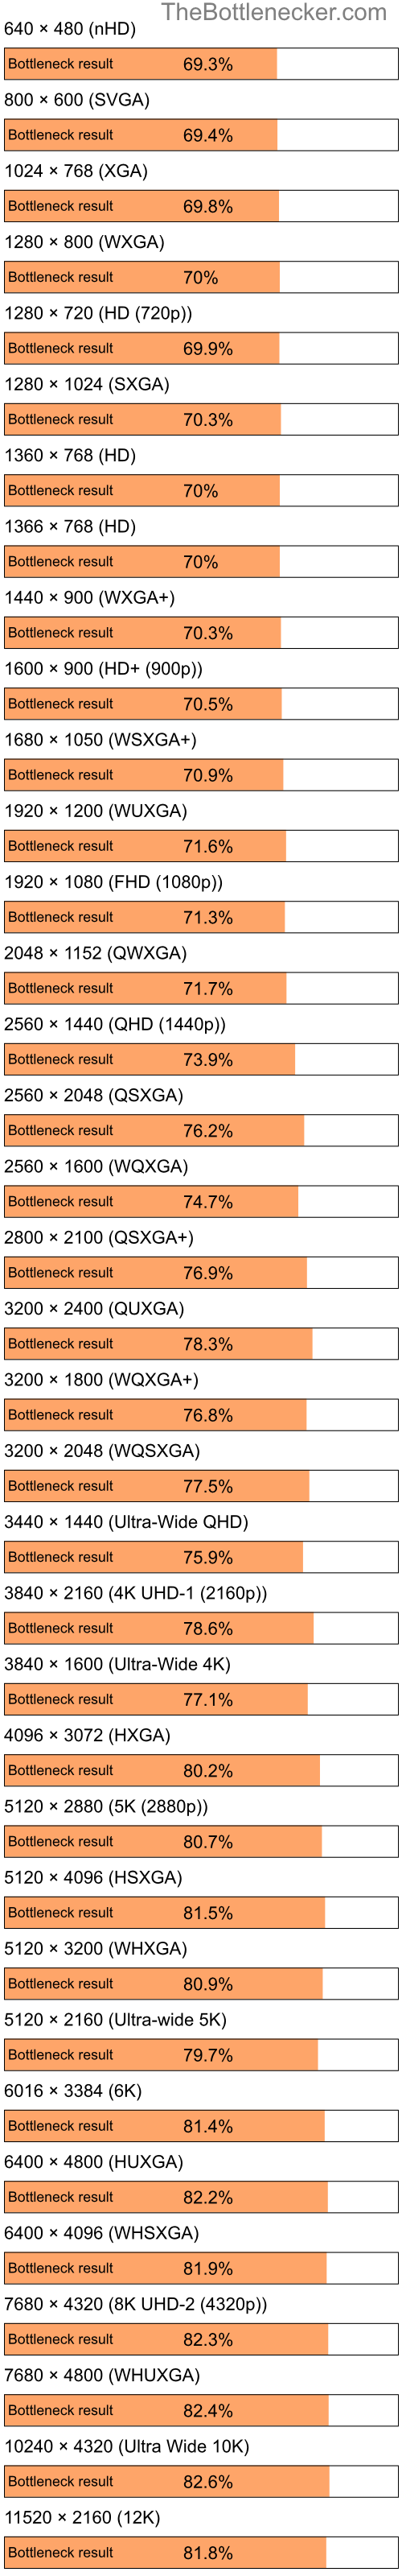 Bottleneck results by resolution for Intel Celeron M 410 and AMD Radeon X1250 in Processor Intense Tasks